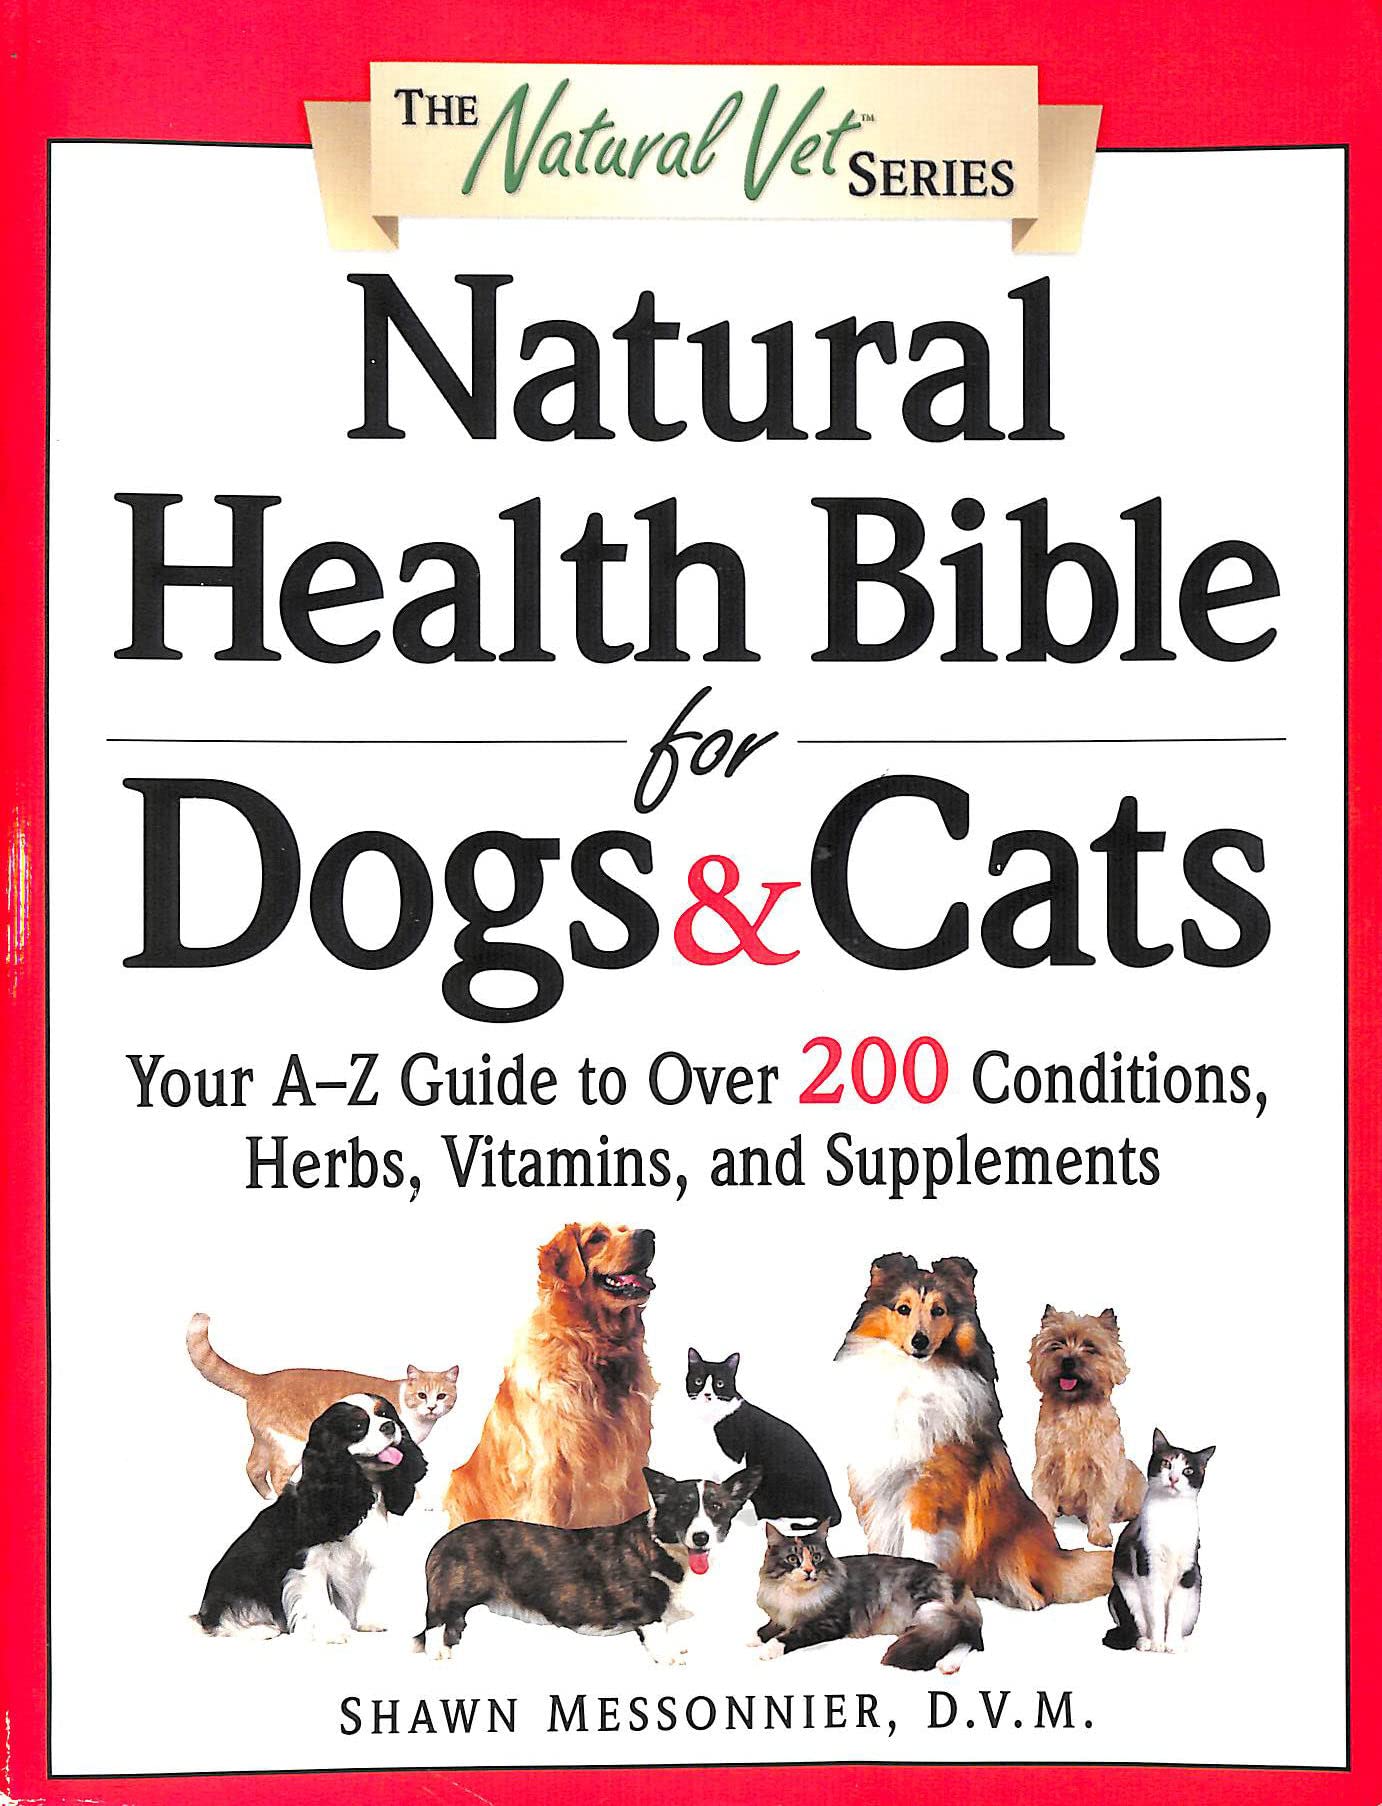 Natural Health Bible for Dogs & Cats : Your A-Z Guide to Over 200 Conditions, Herbs, Vitamins, and Supplements - image 1 of 1